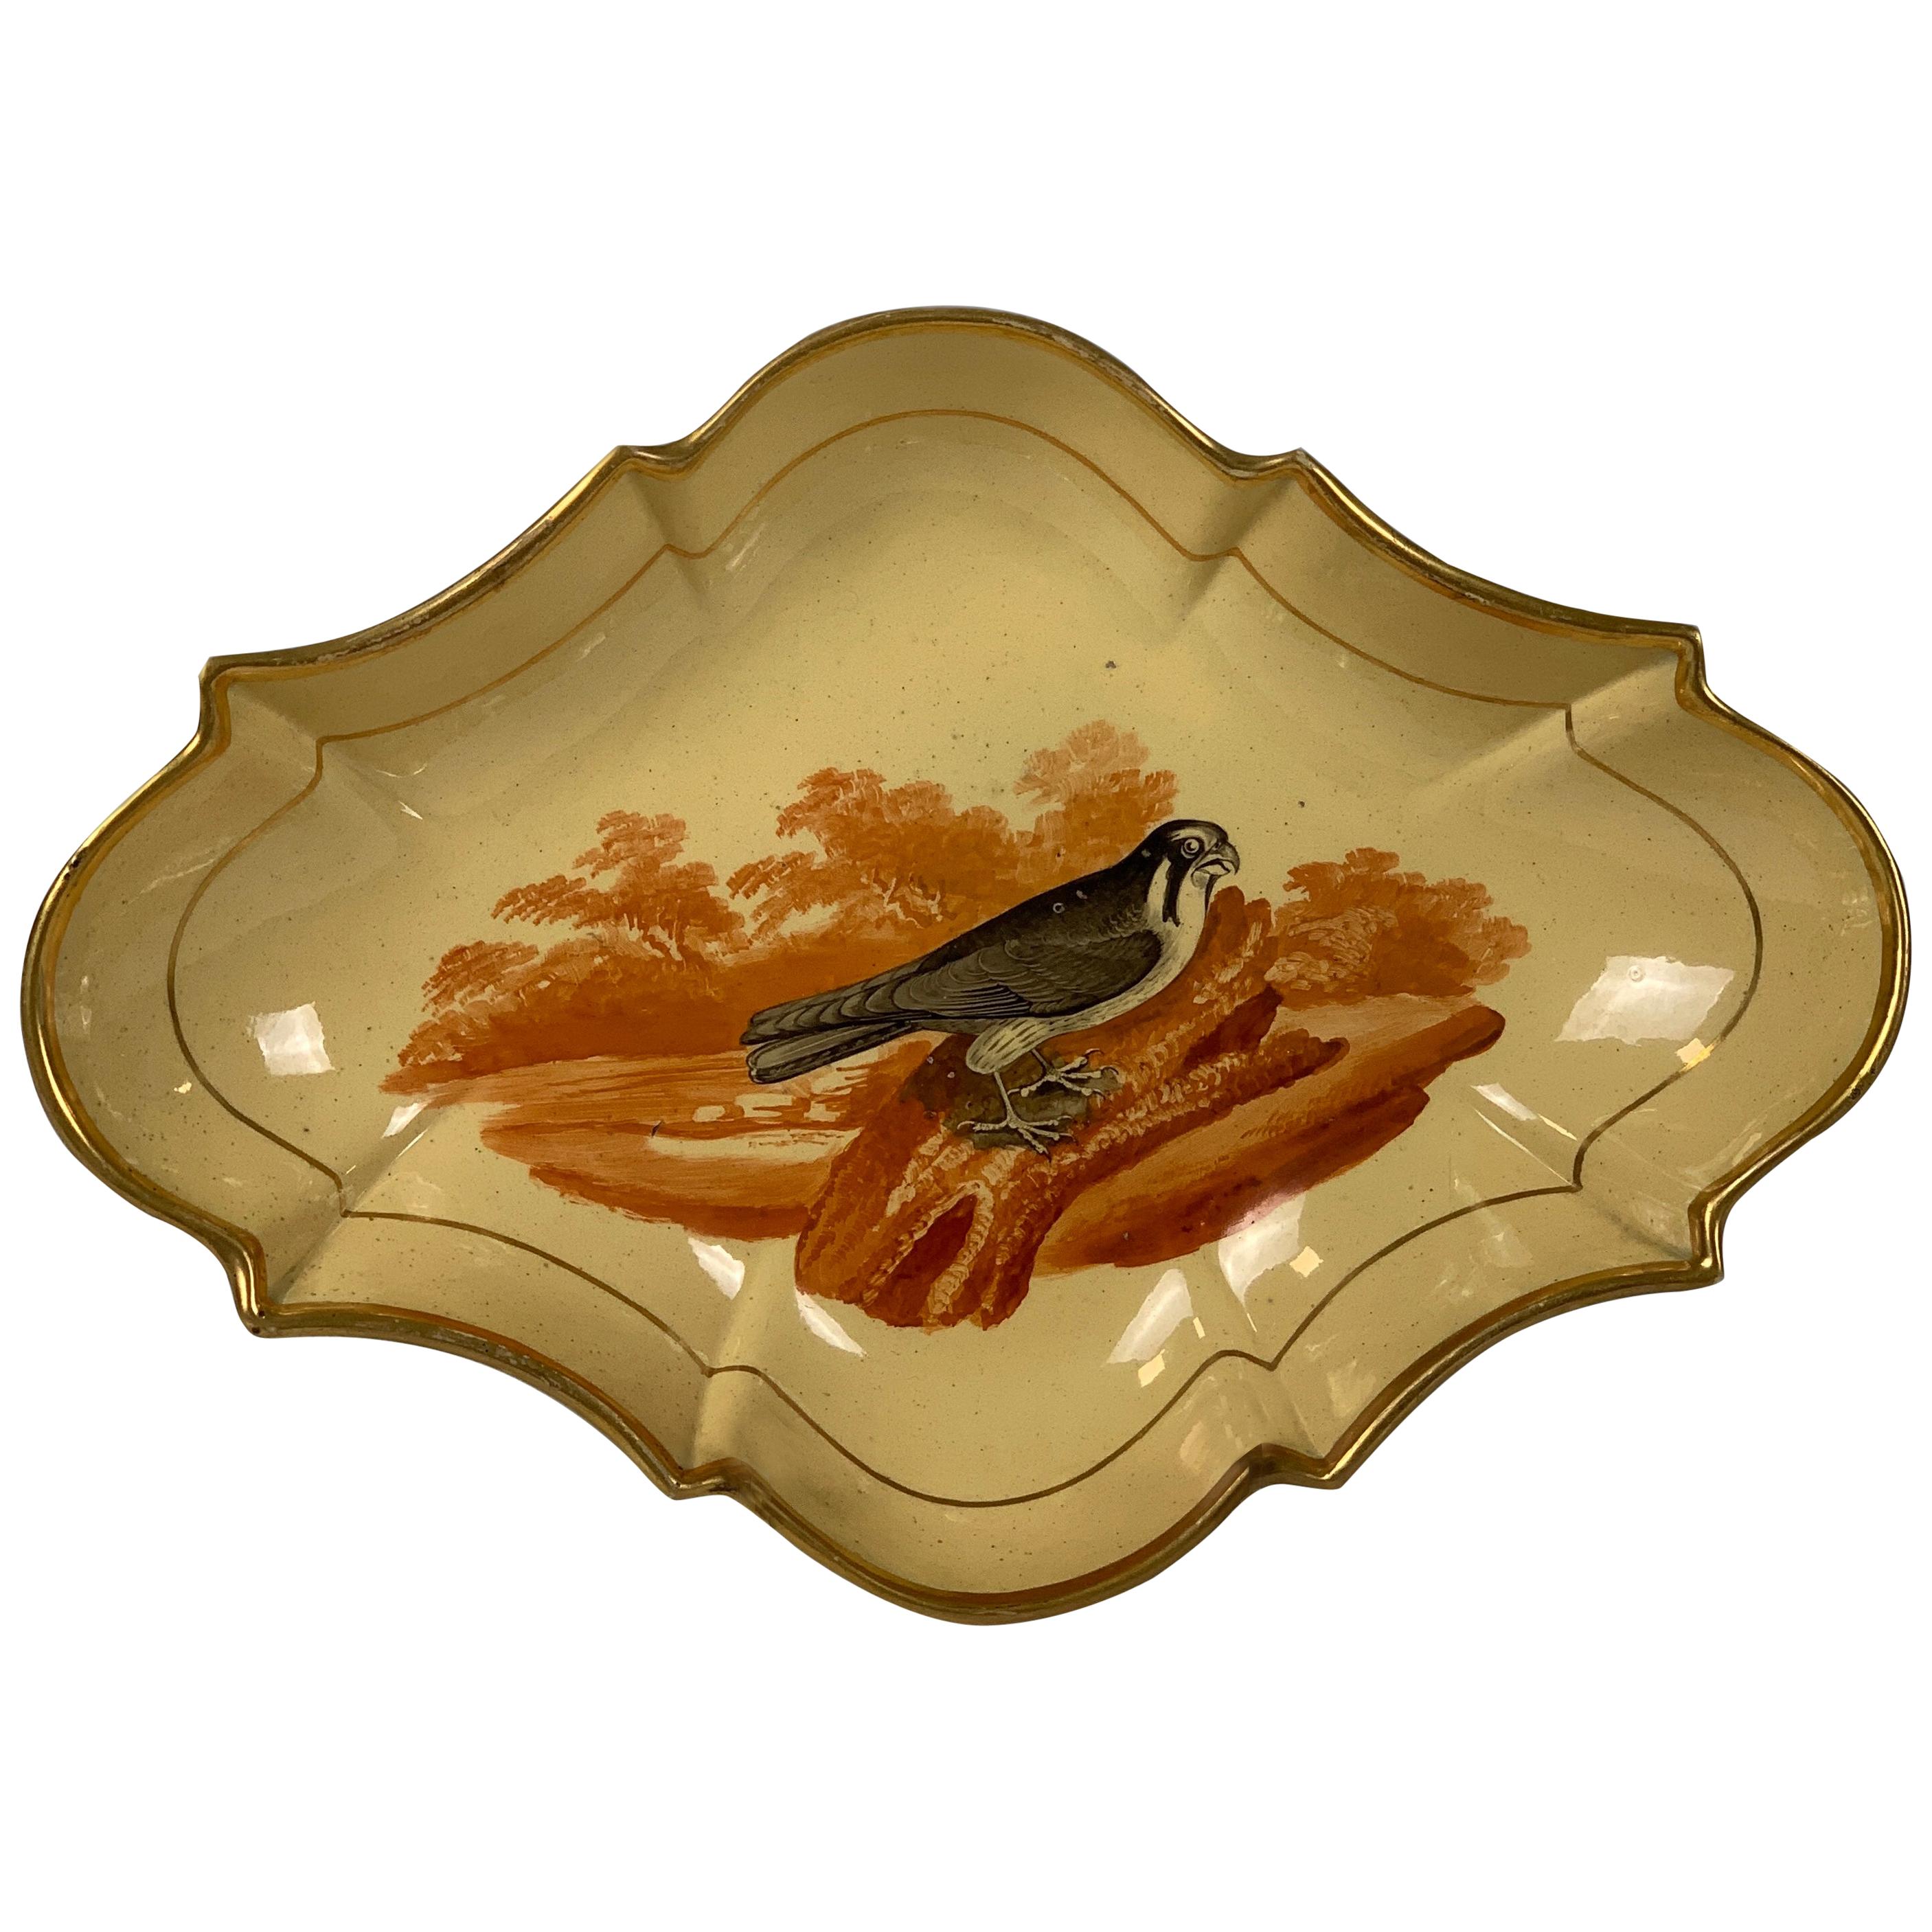 Antique Drabware Dish Showing Bird Made by Job Ridgway 1802-1808 For Sale